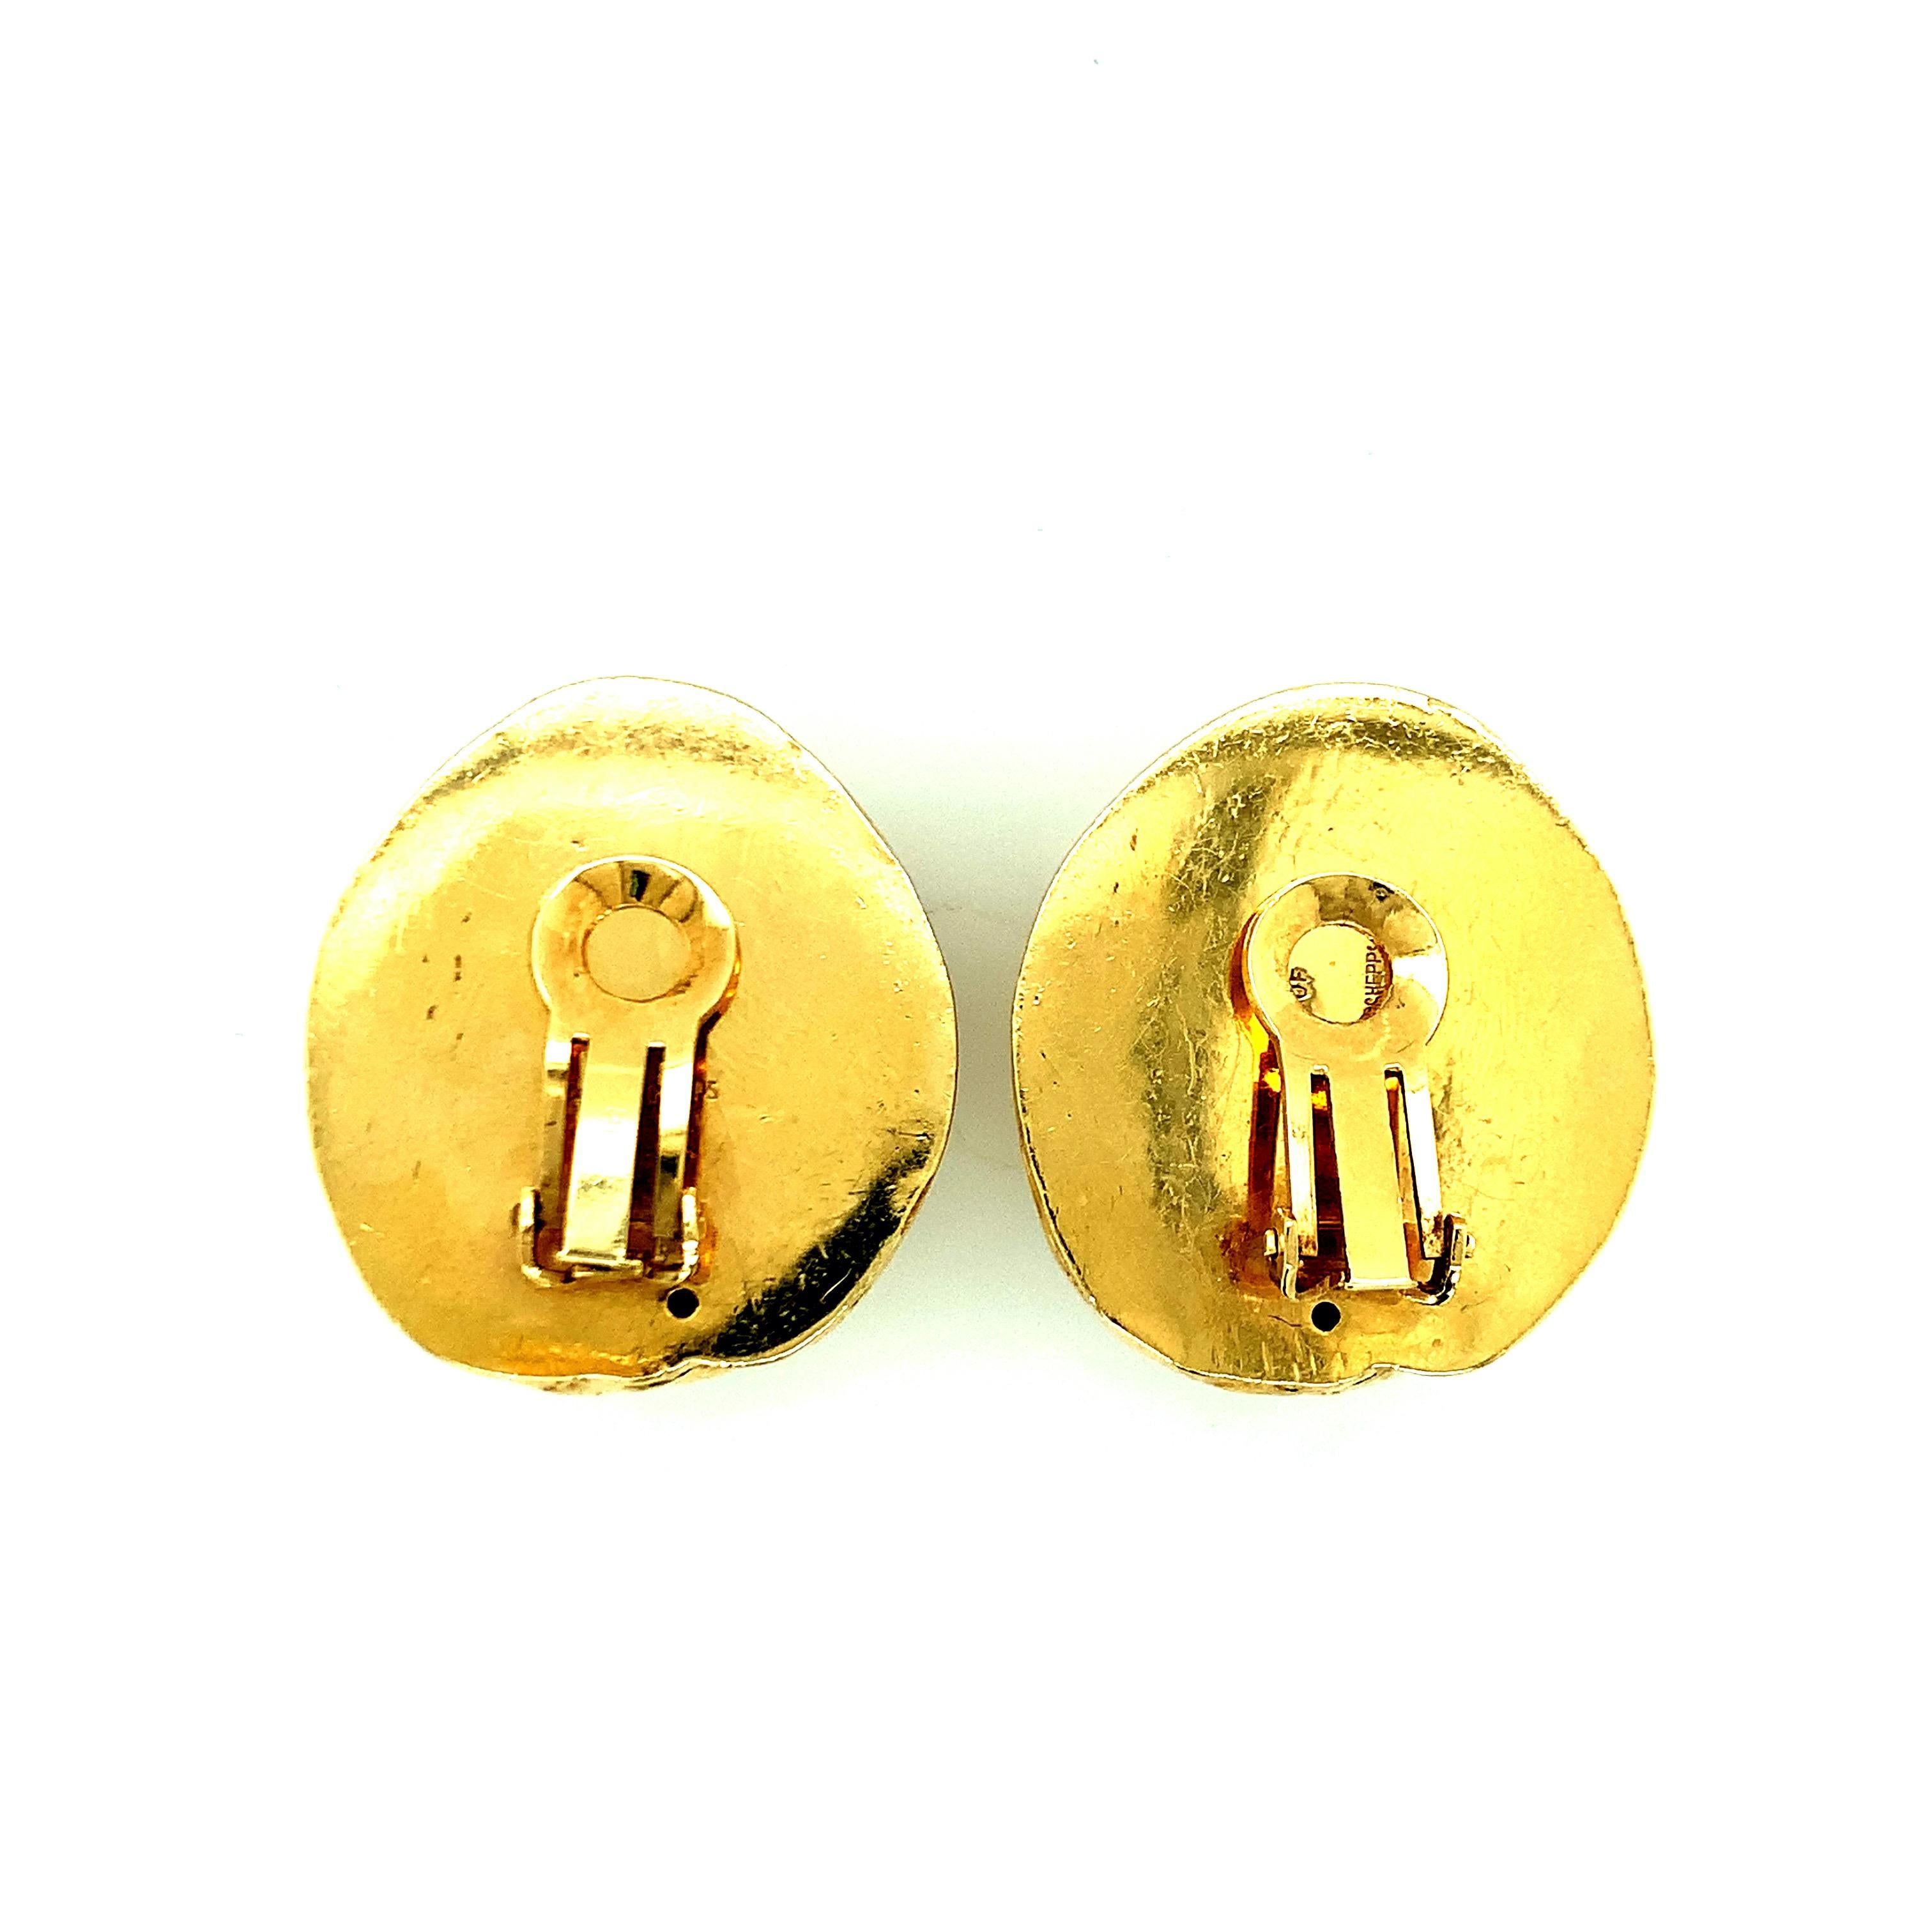 Seaman Schepps unique ear clips that come in the form of 18 karat yellow gold walnuts. With a total weight of 49.3 grams, these ear clips are certain to catch everyone’s attention. Marked Seaman Schepps. Width: 3 cm. Length: 3.2 cm. 